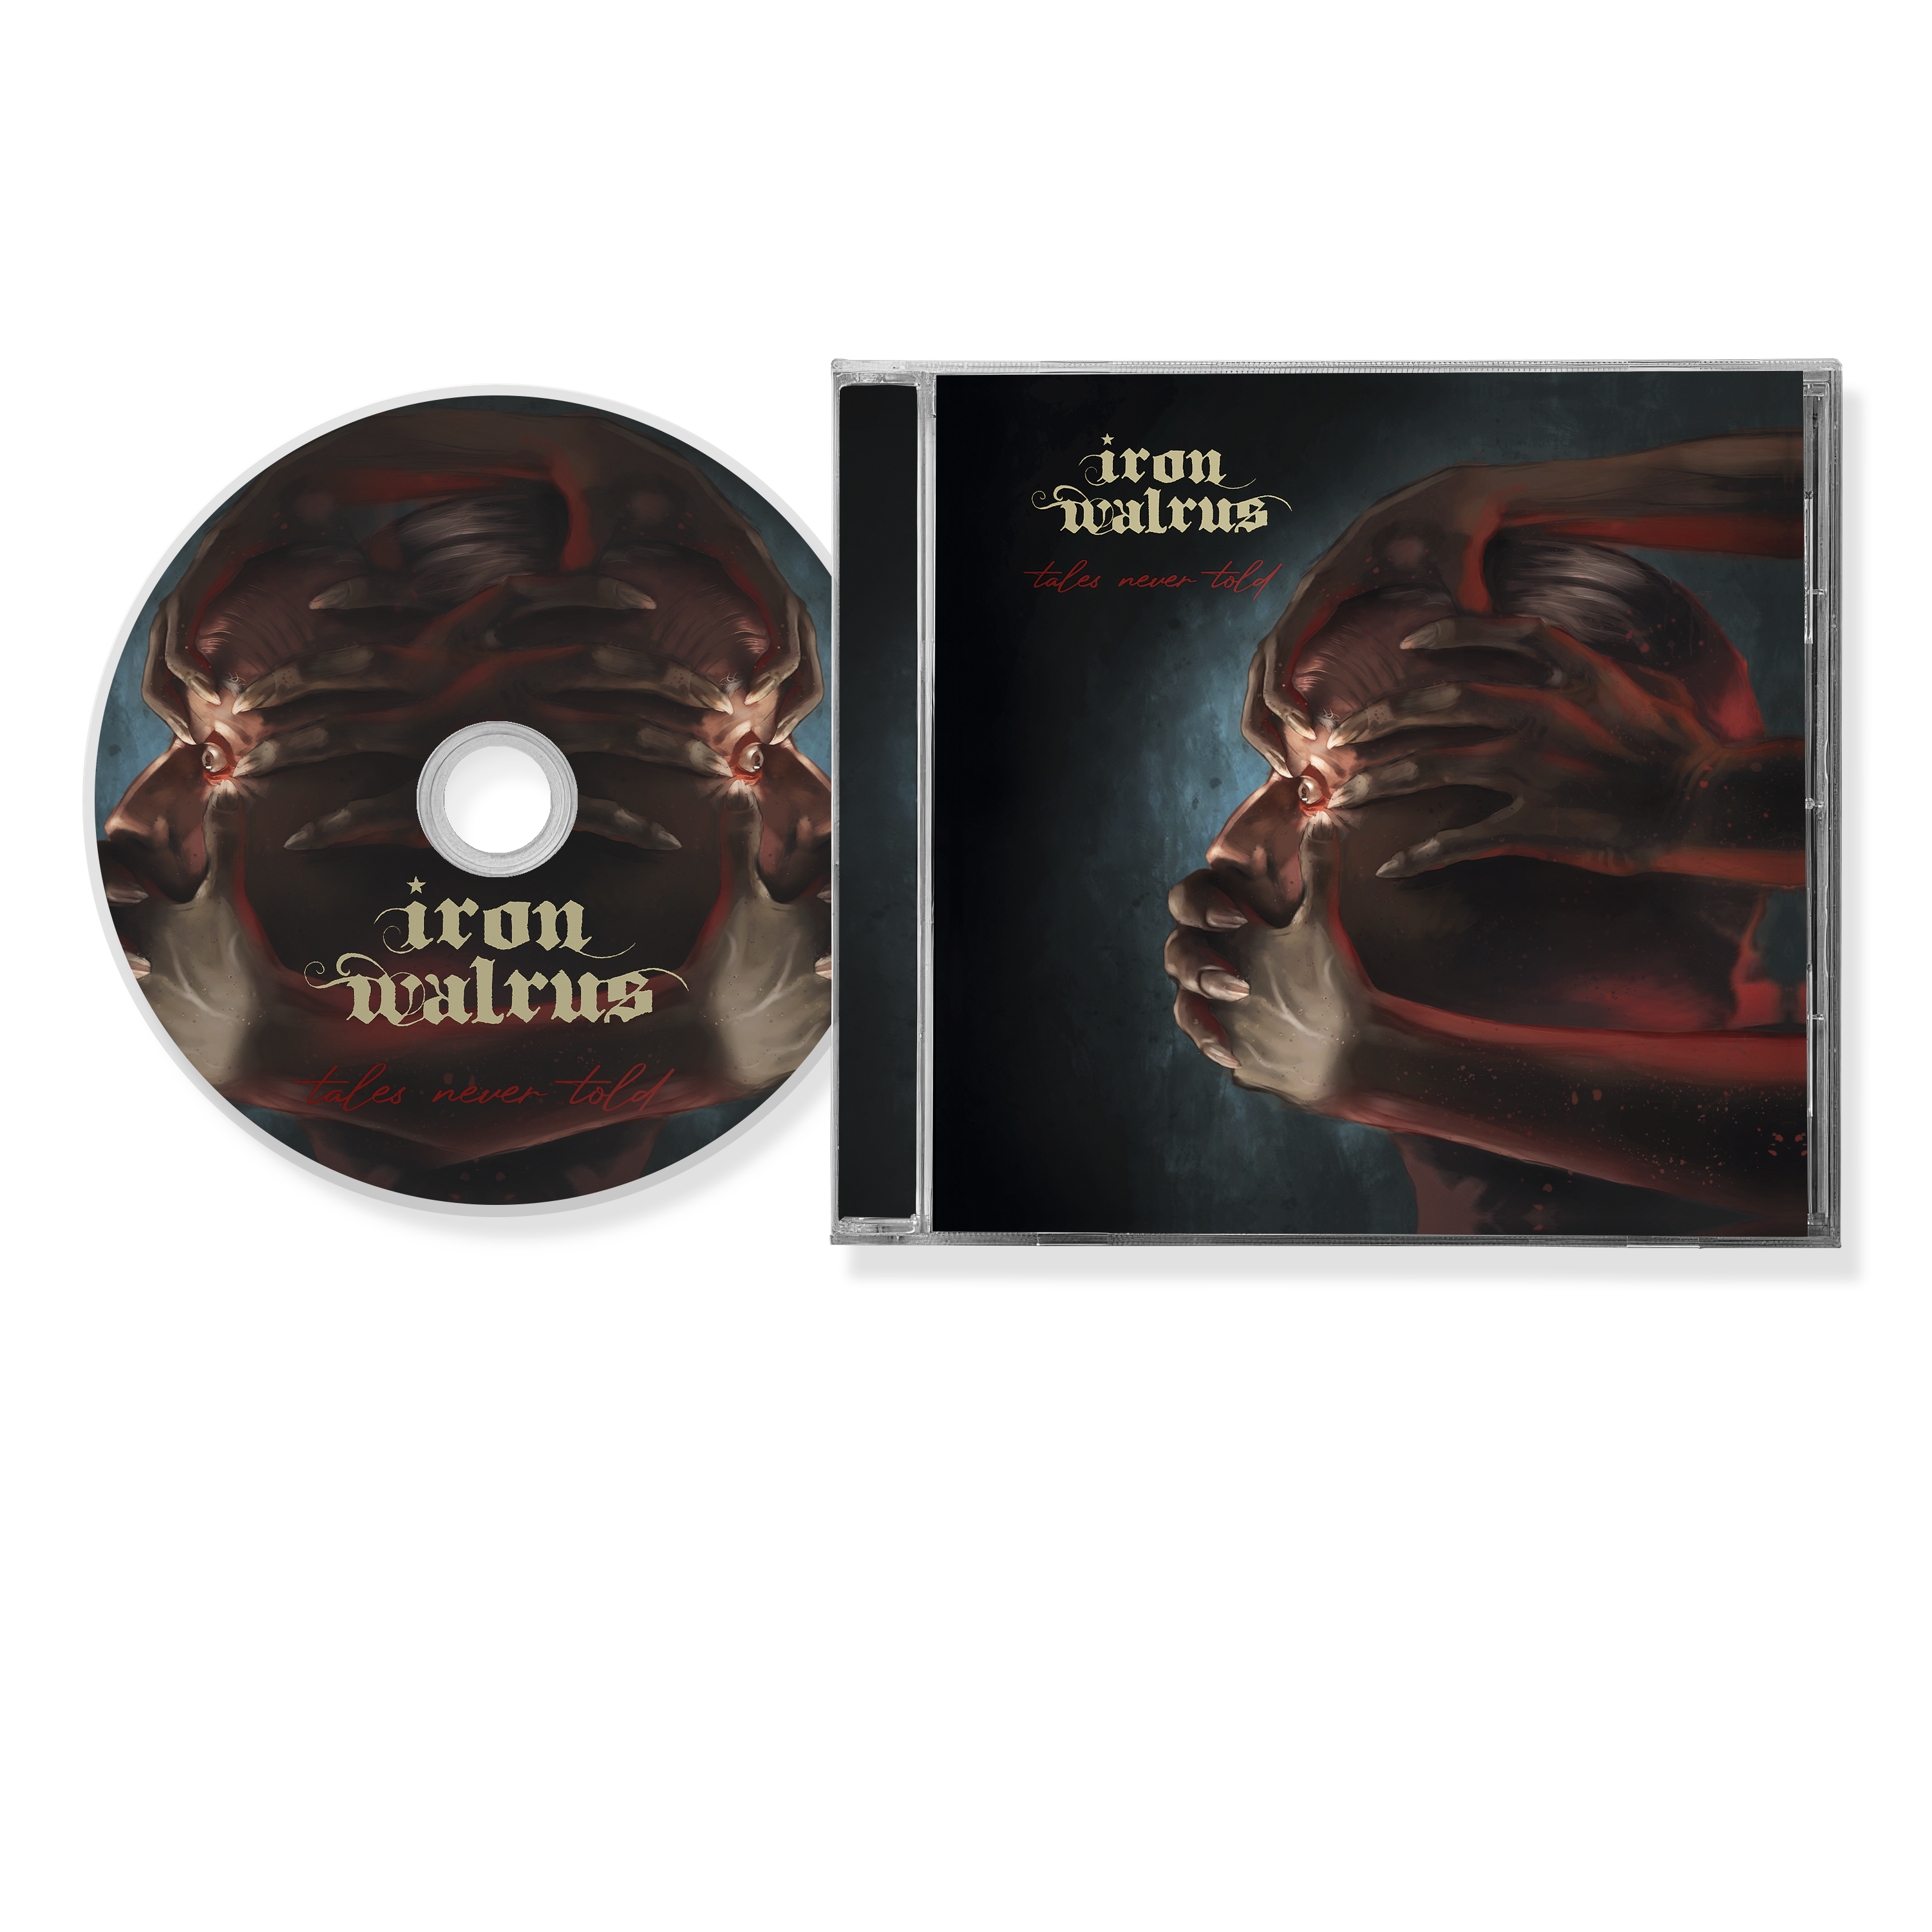 IRON WALRUS - Tales Never Told [CD]